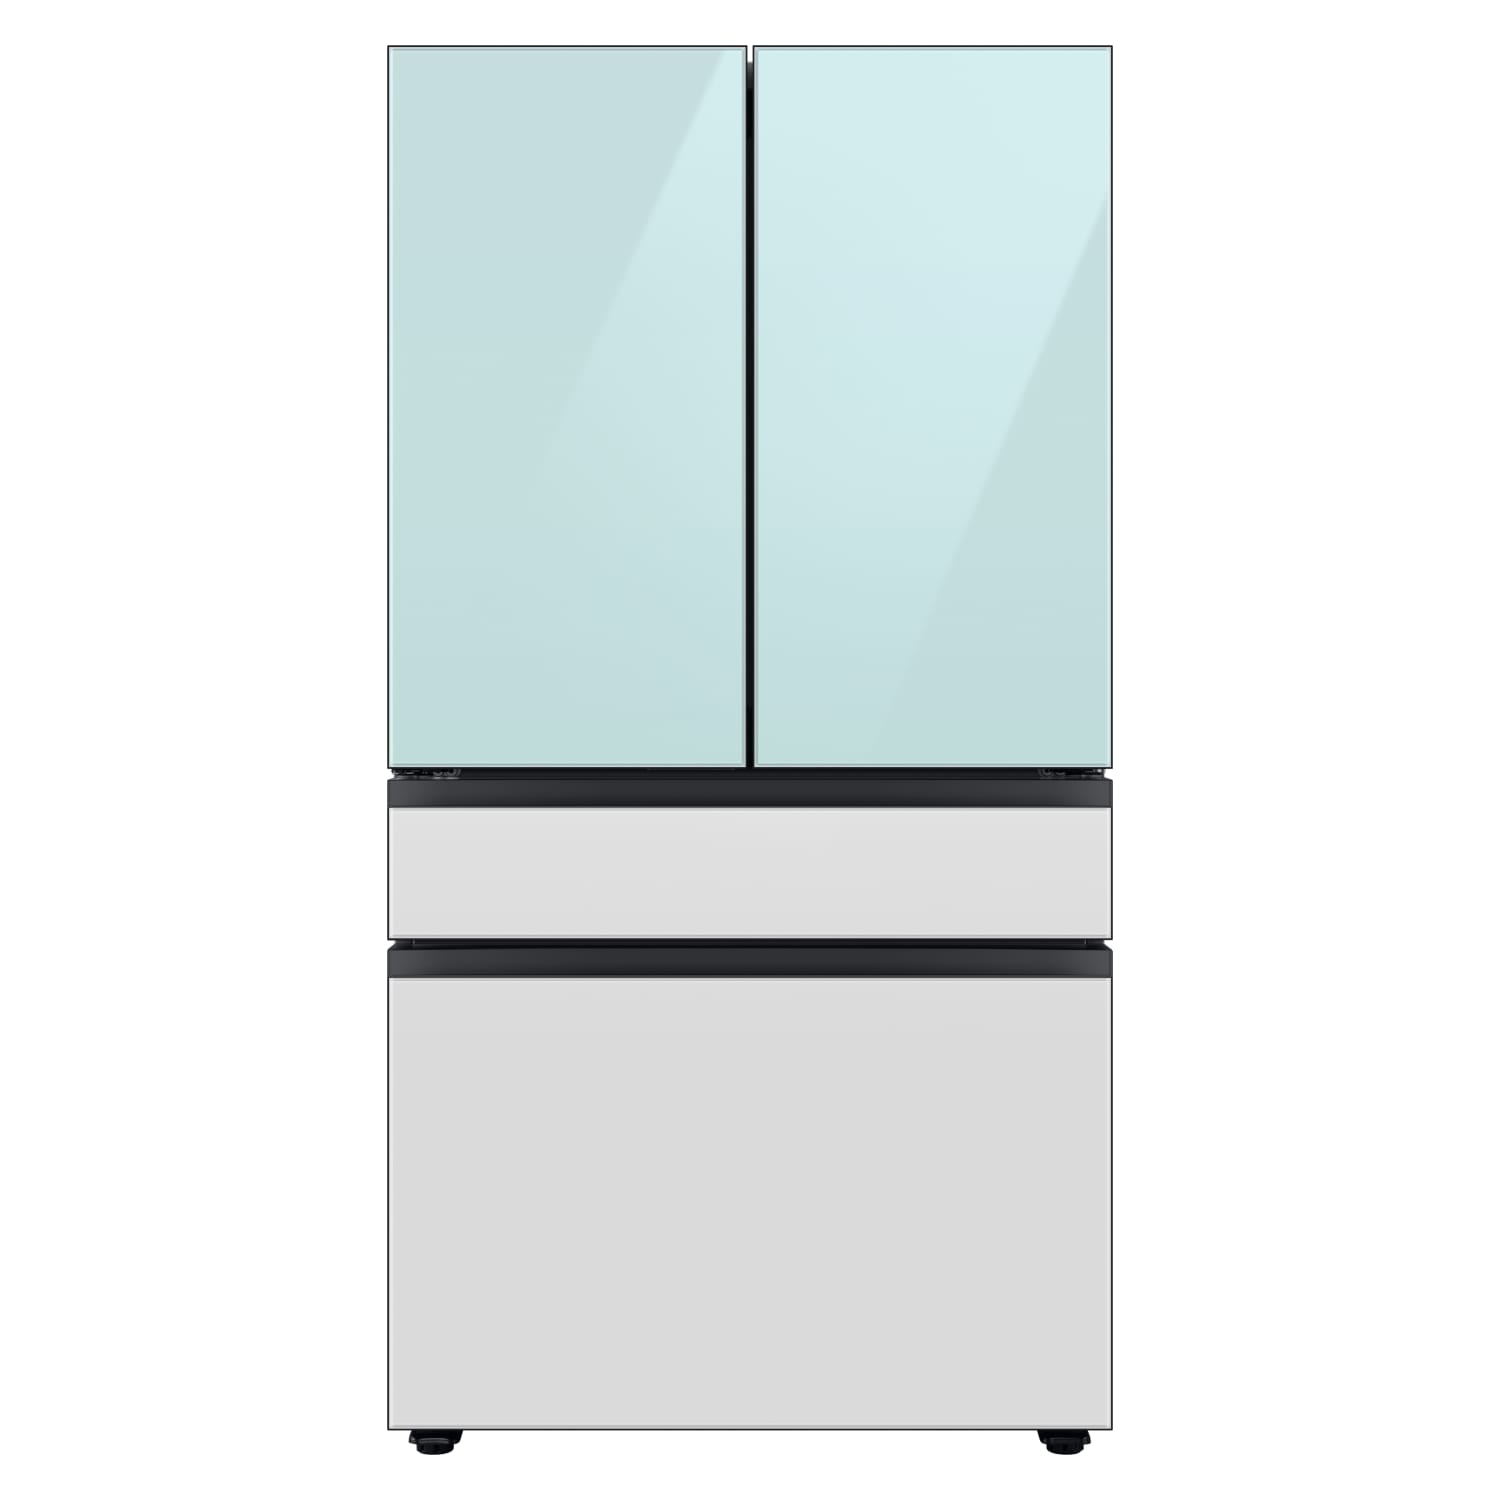 Samsung BESPOKE 23 cu. ft. Smart 4-Door French-Door Refrigerator  in Morning Blue Glass Top Panel with White Glass Middle and Bottom Panels